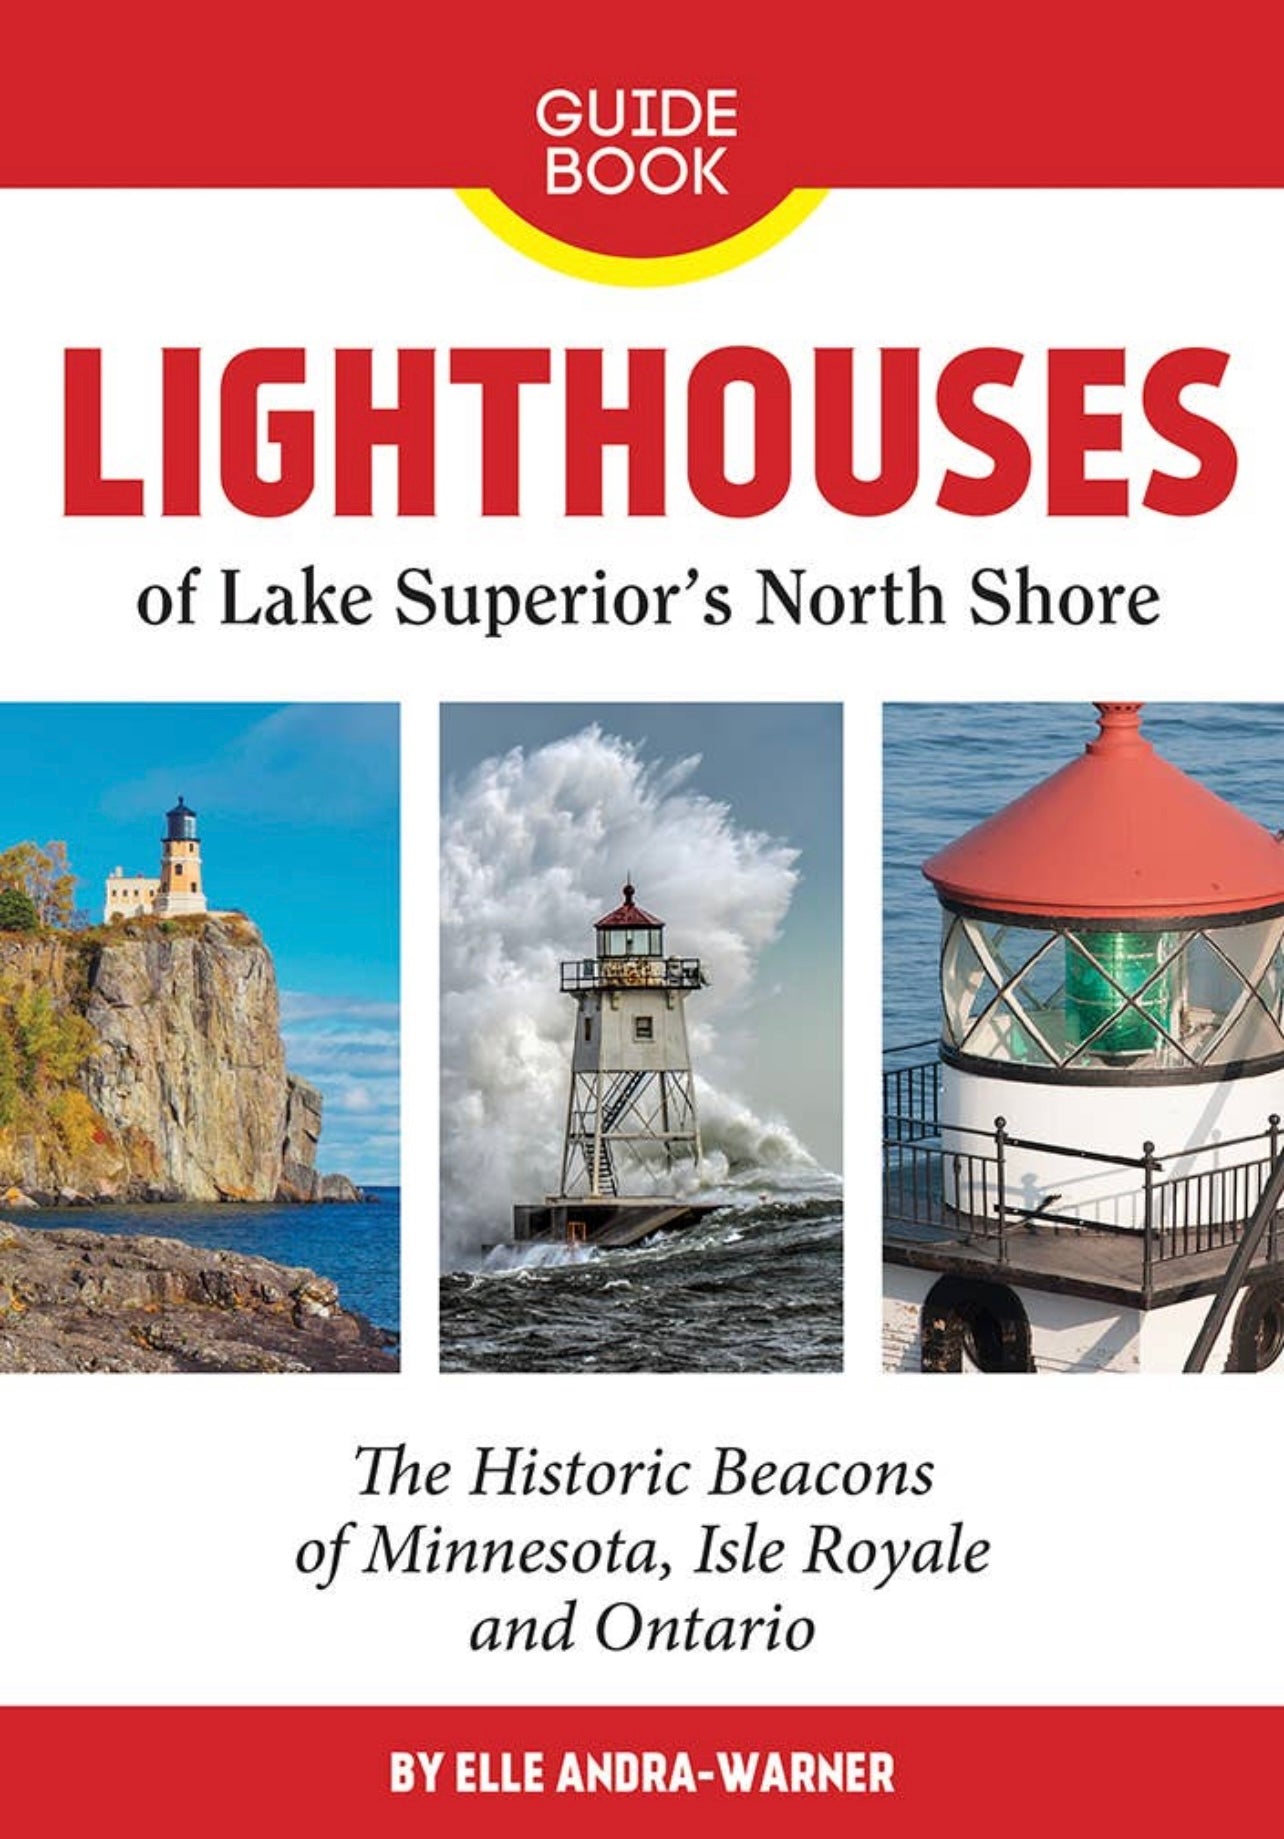 Lighthouses of Lake Superior’s North Shore